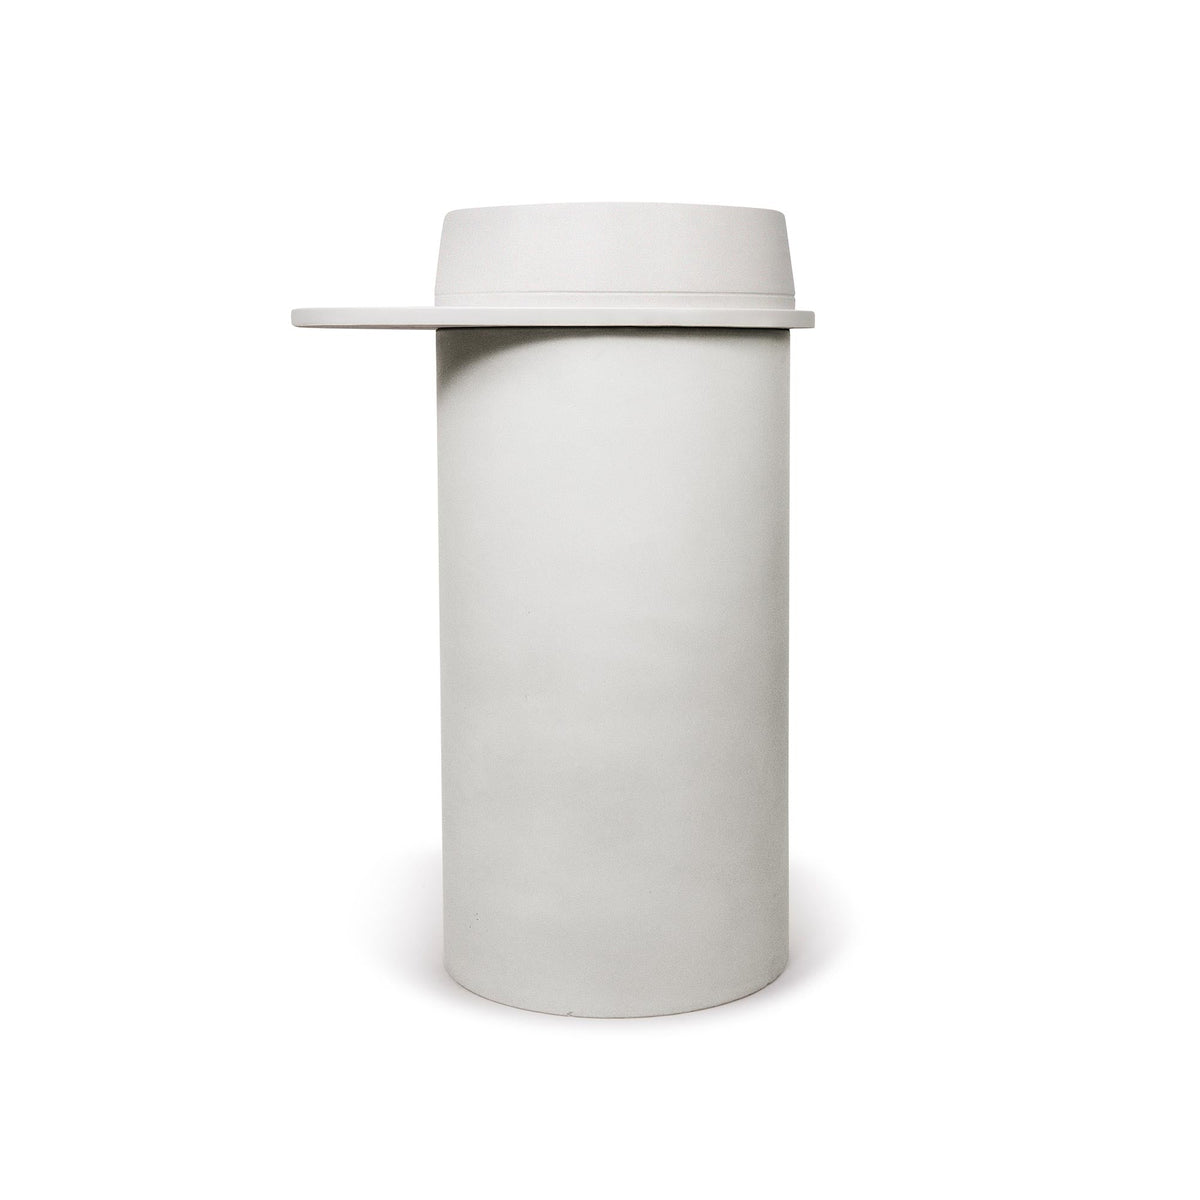 Cylinder with Tray - Funl Basin (Ivory,Musk)